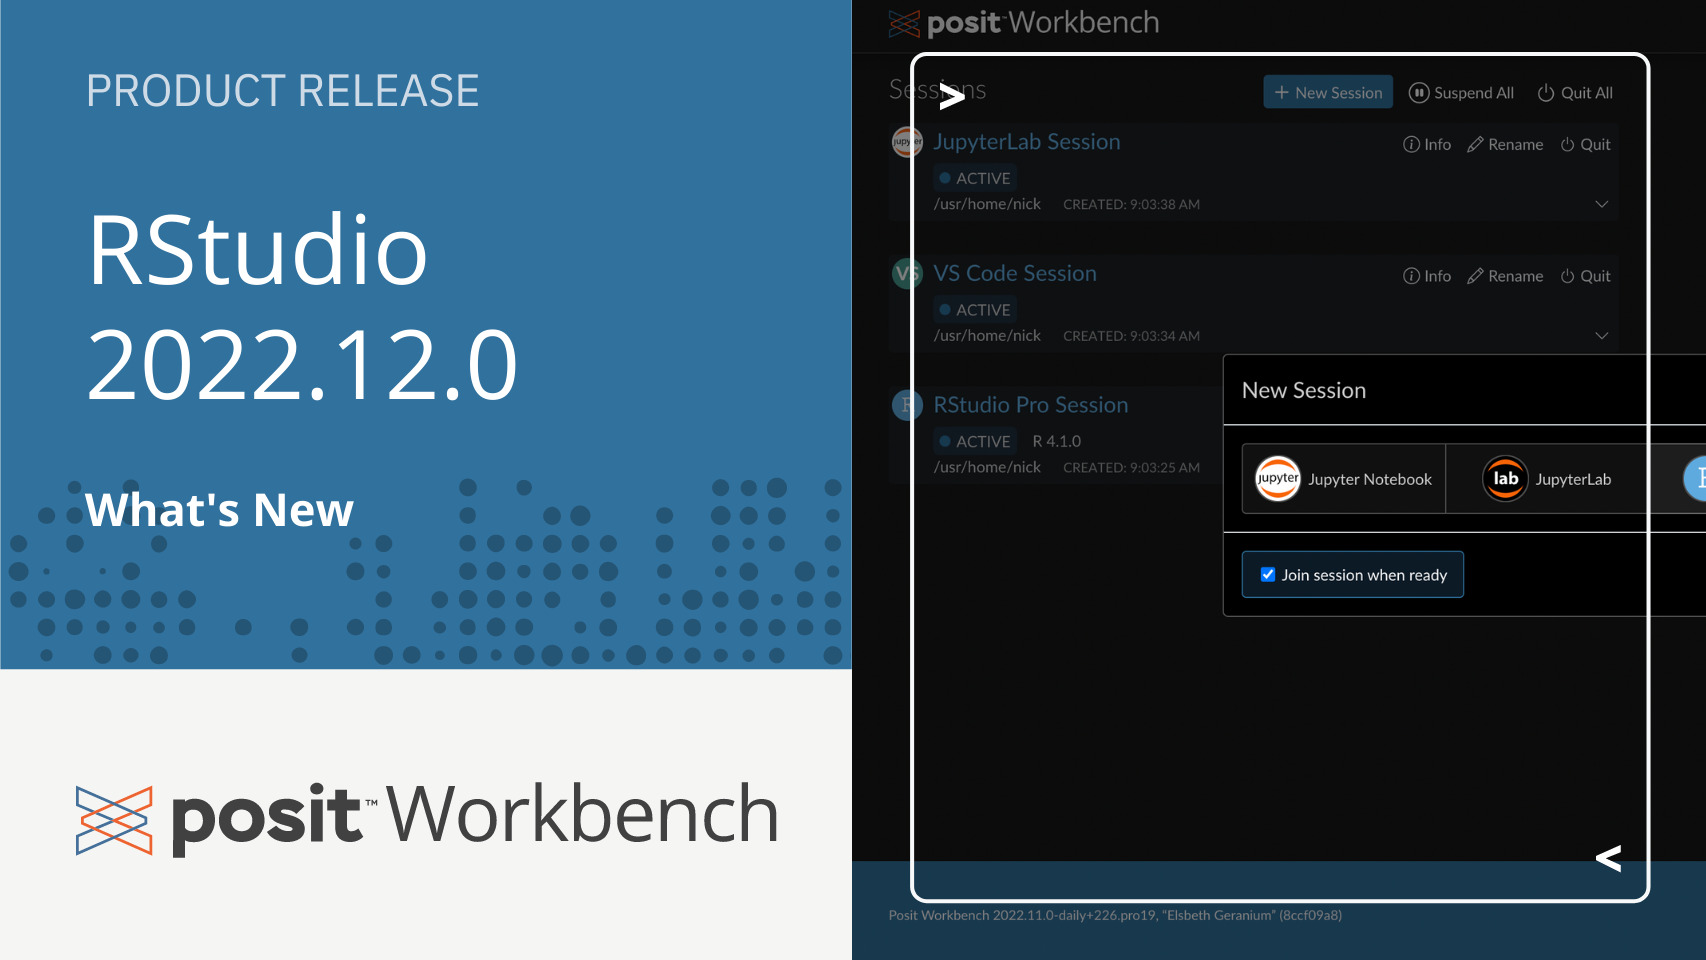 Text on right: Product Release, RStudio 2022.12.0, What's New. Posit Workbench icon on the bottom. On the left, a screenshot of the Workbench IDE selector screen.